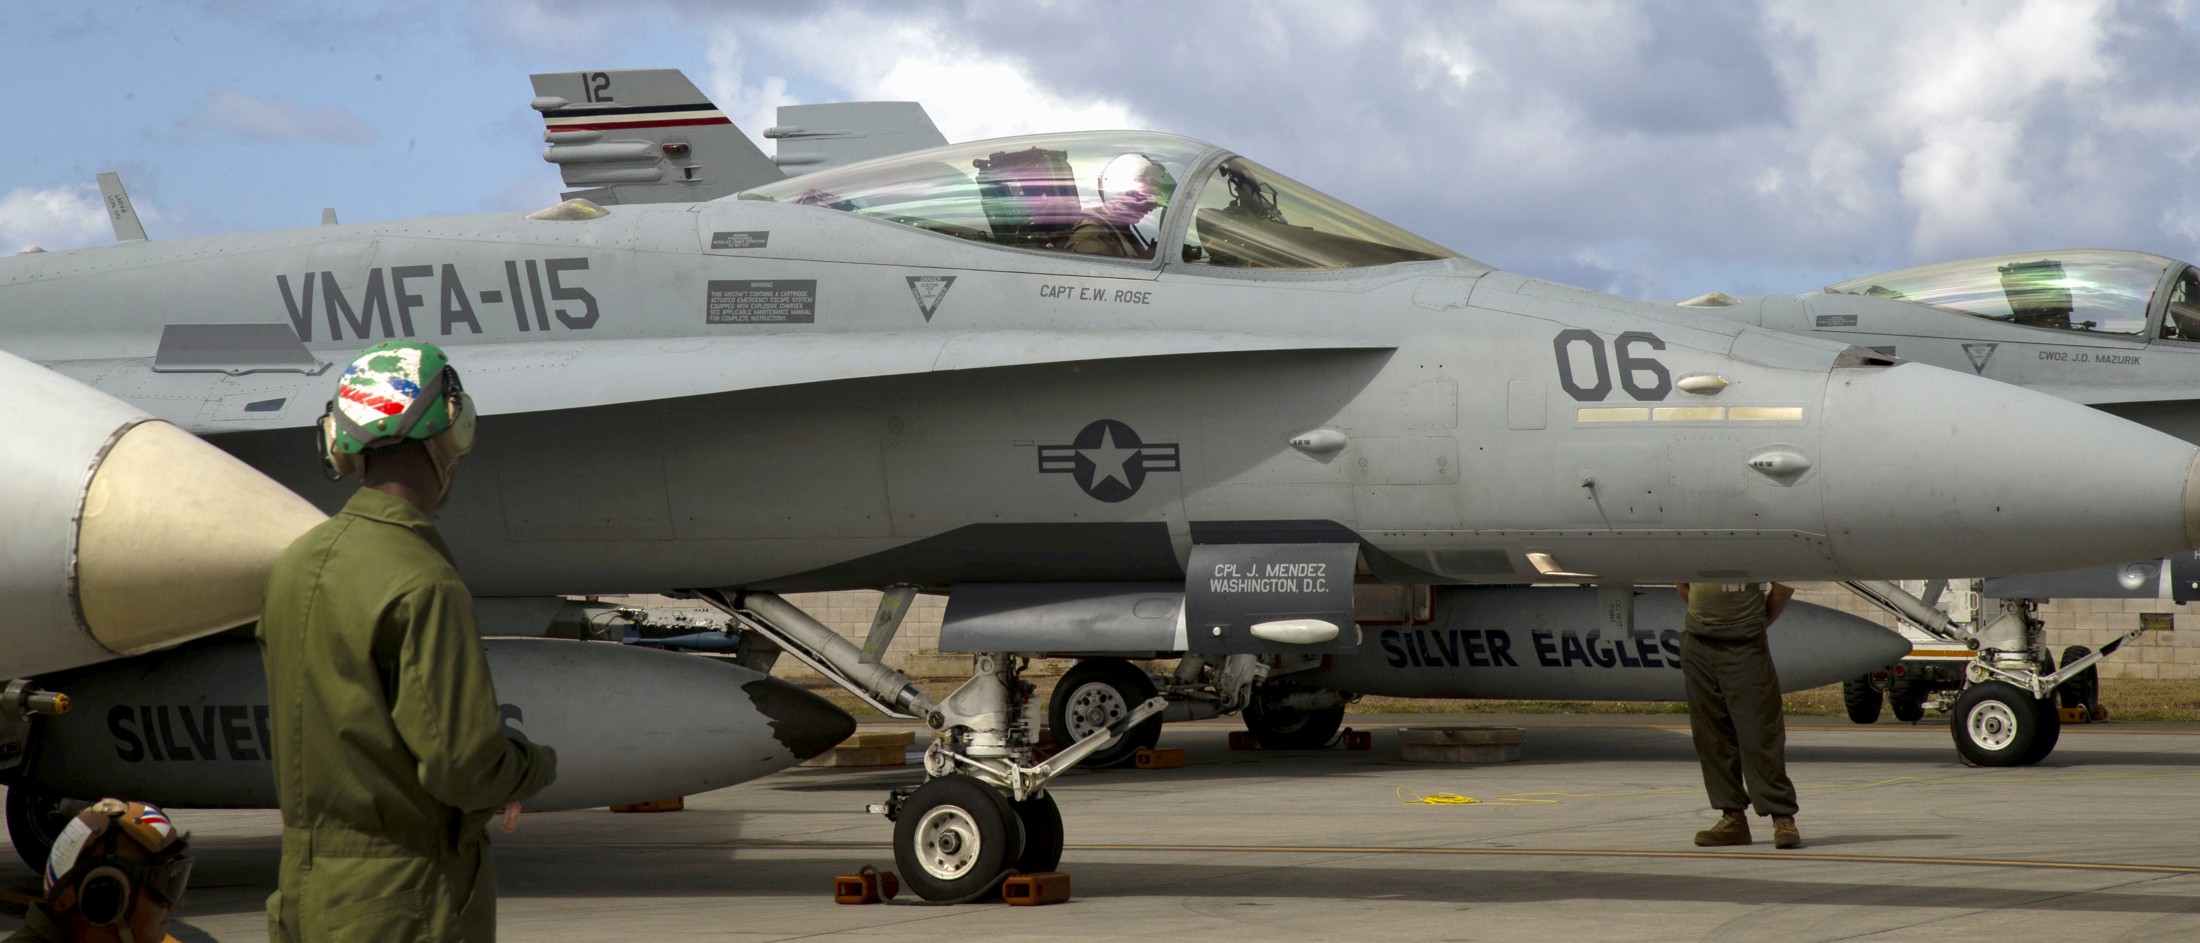 vmfa-115 silver eagles marine fighter attack squadron usmc f/a-18c hornet 202 kaneohe hawaii